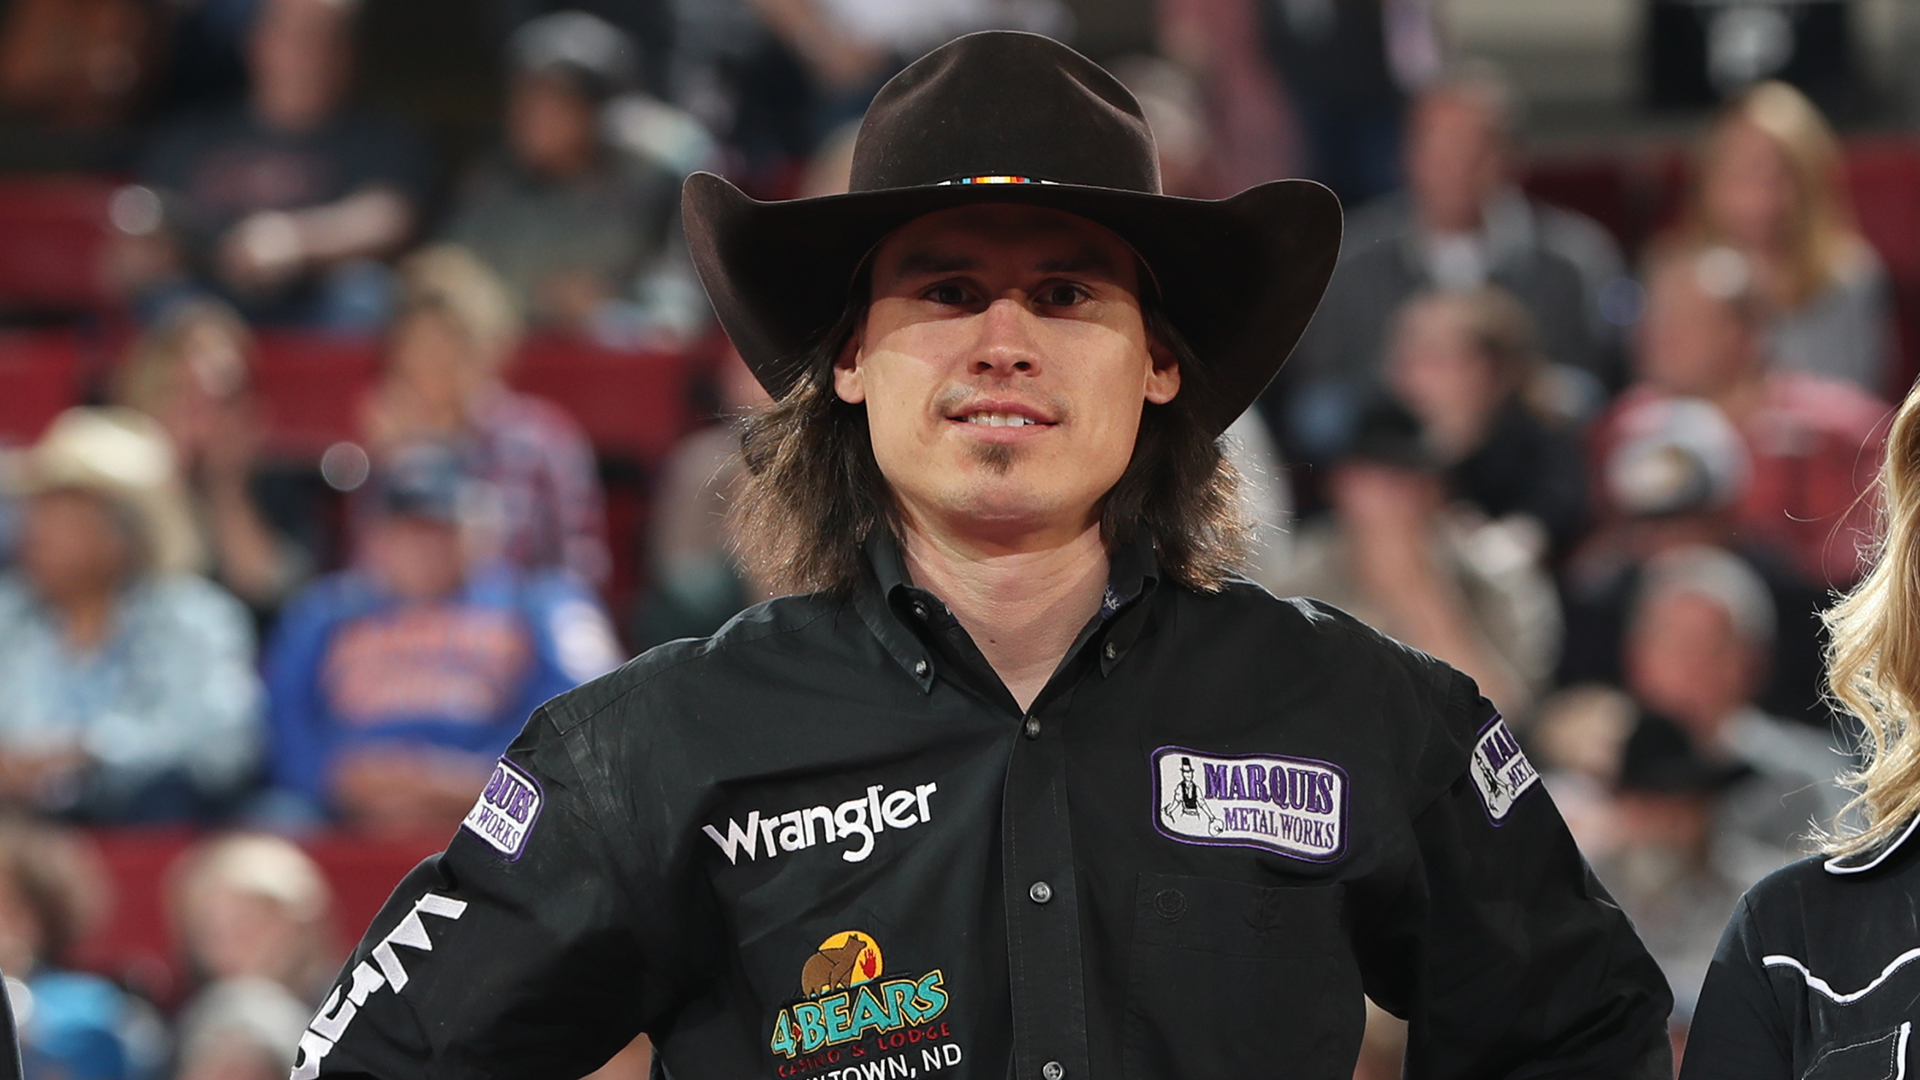 Stetson Lawrence (Chippewa/Sioux) Earns Round Win In Billings, Moves Into Top 20 Of World Standings